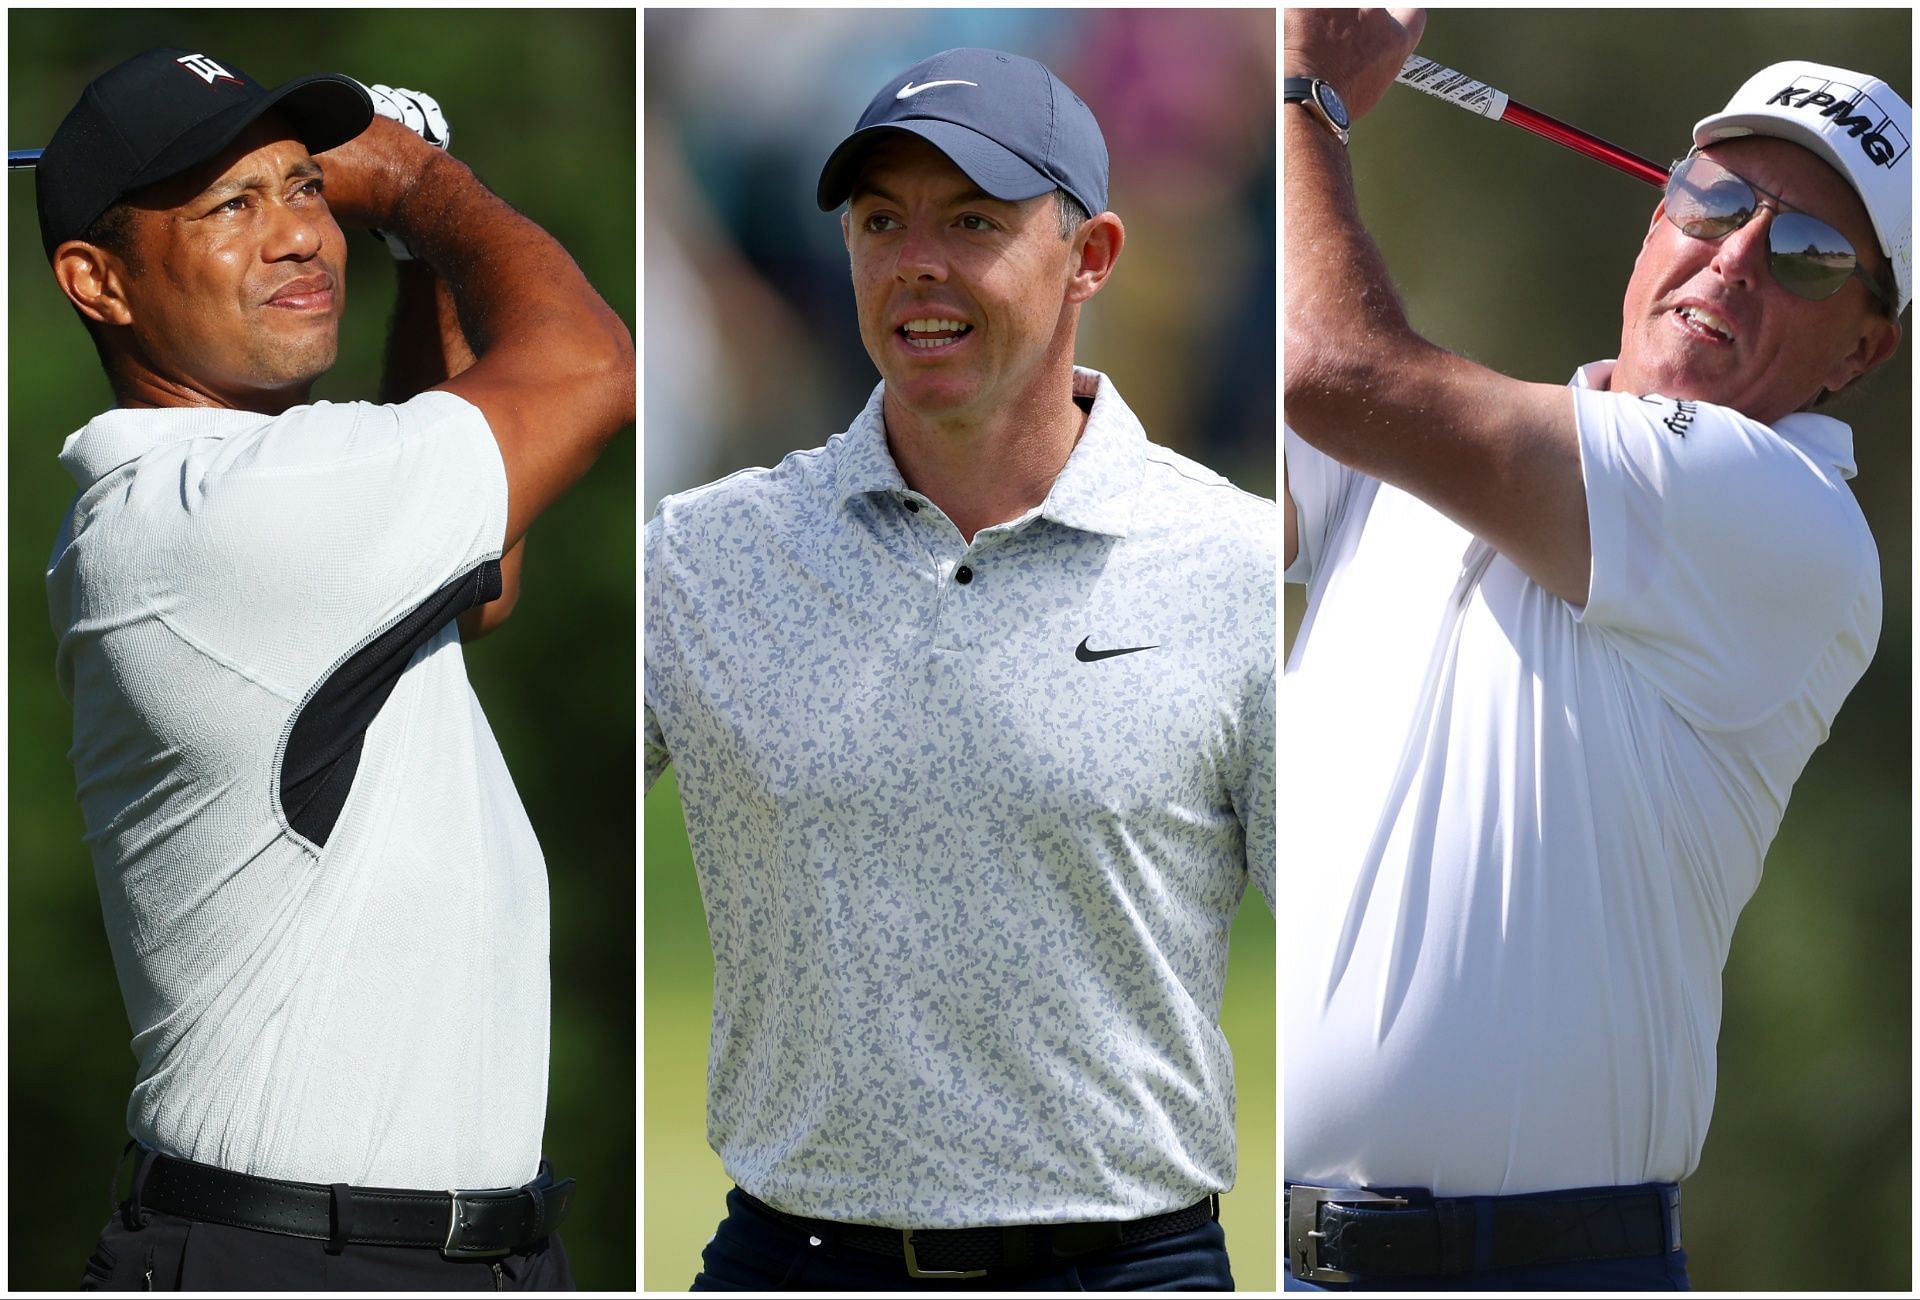 Tiger Woods, Rory McIlroy, and Phil Mickelson (via Getty Images)